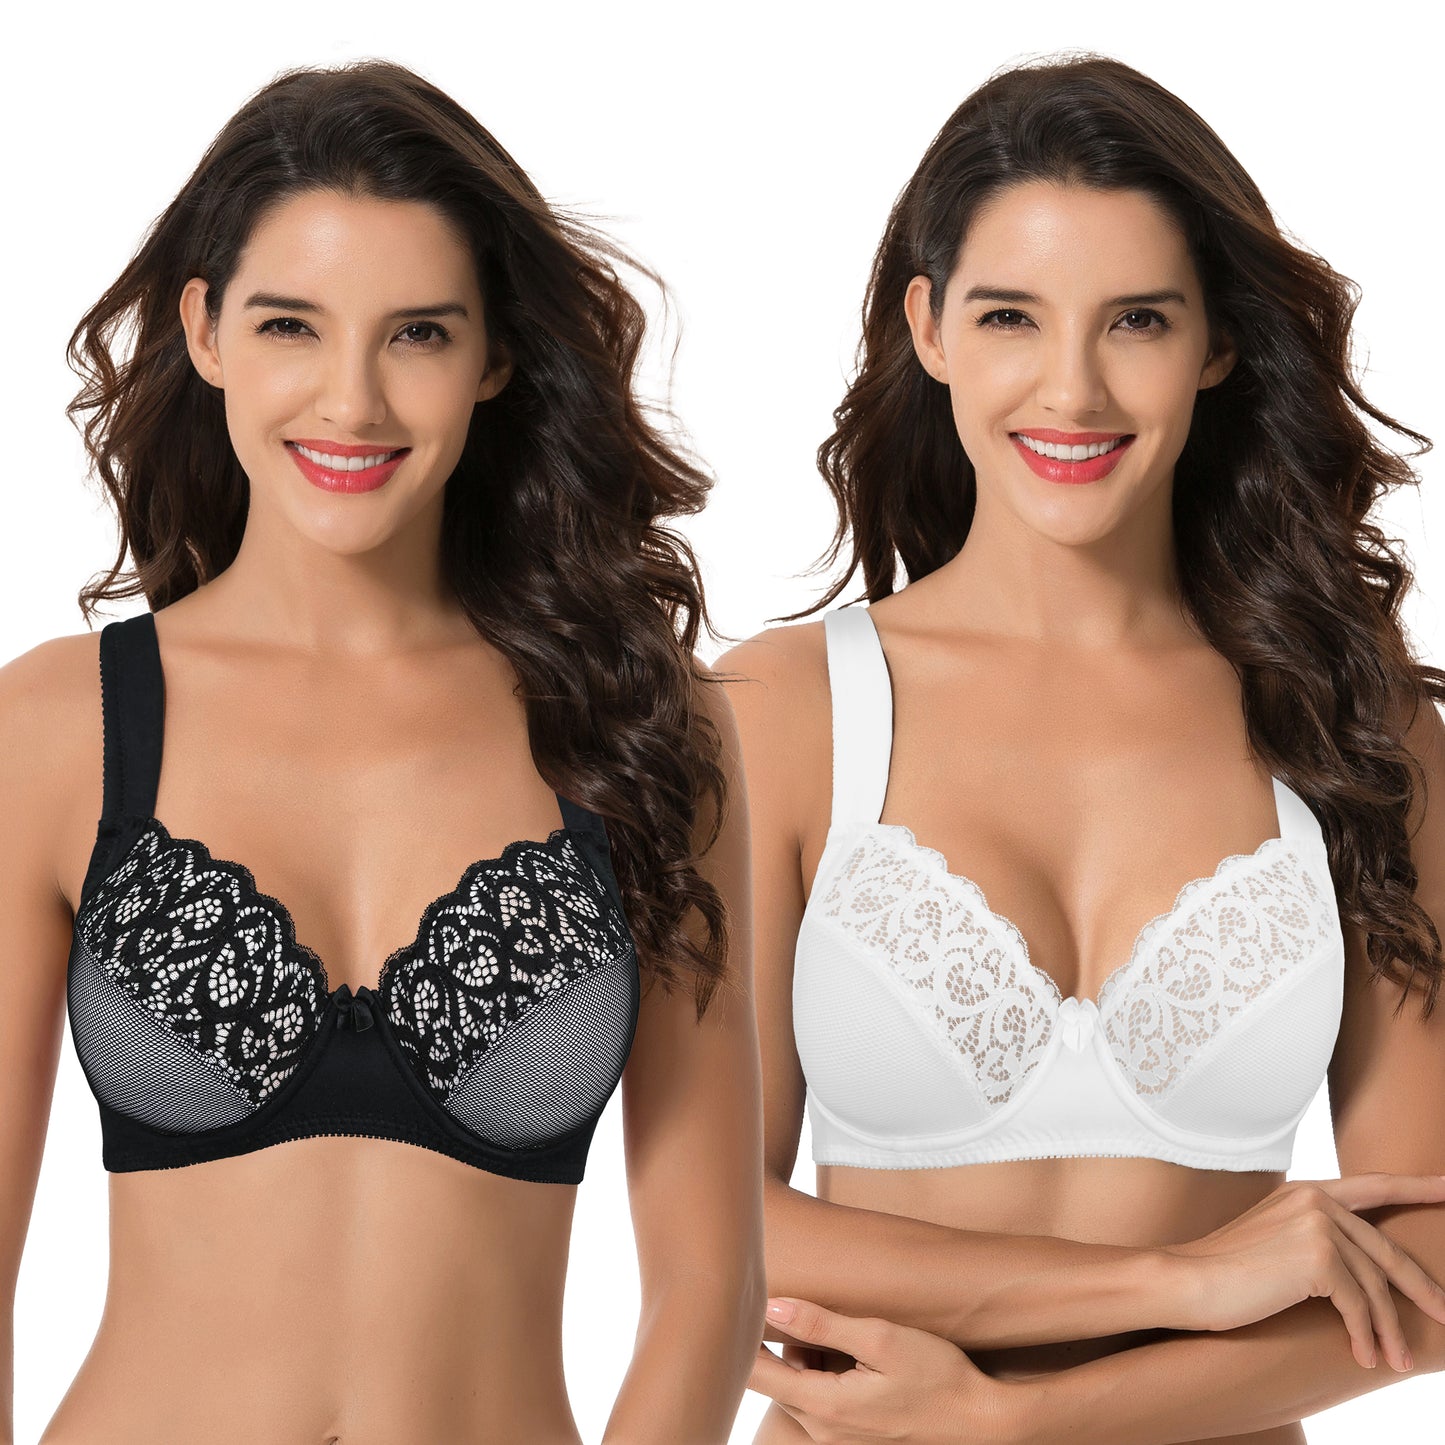 Women's Plus Size Unlined Underwire Lace Bra with Cushion Straps